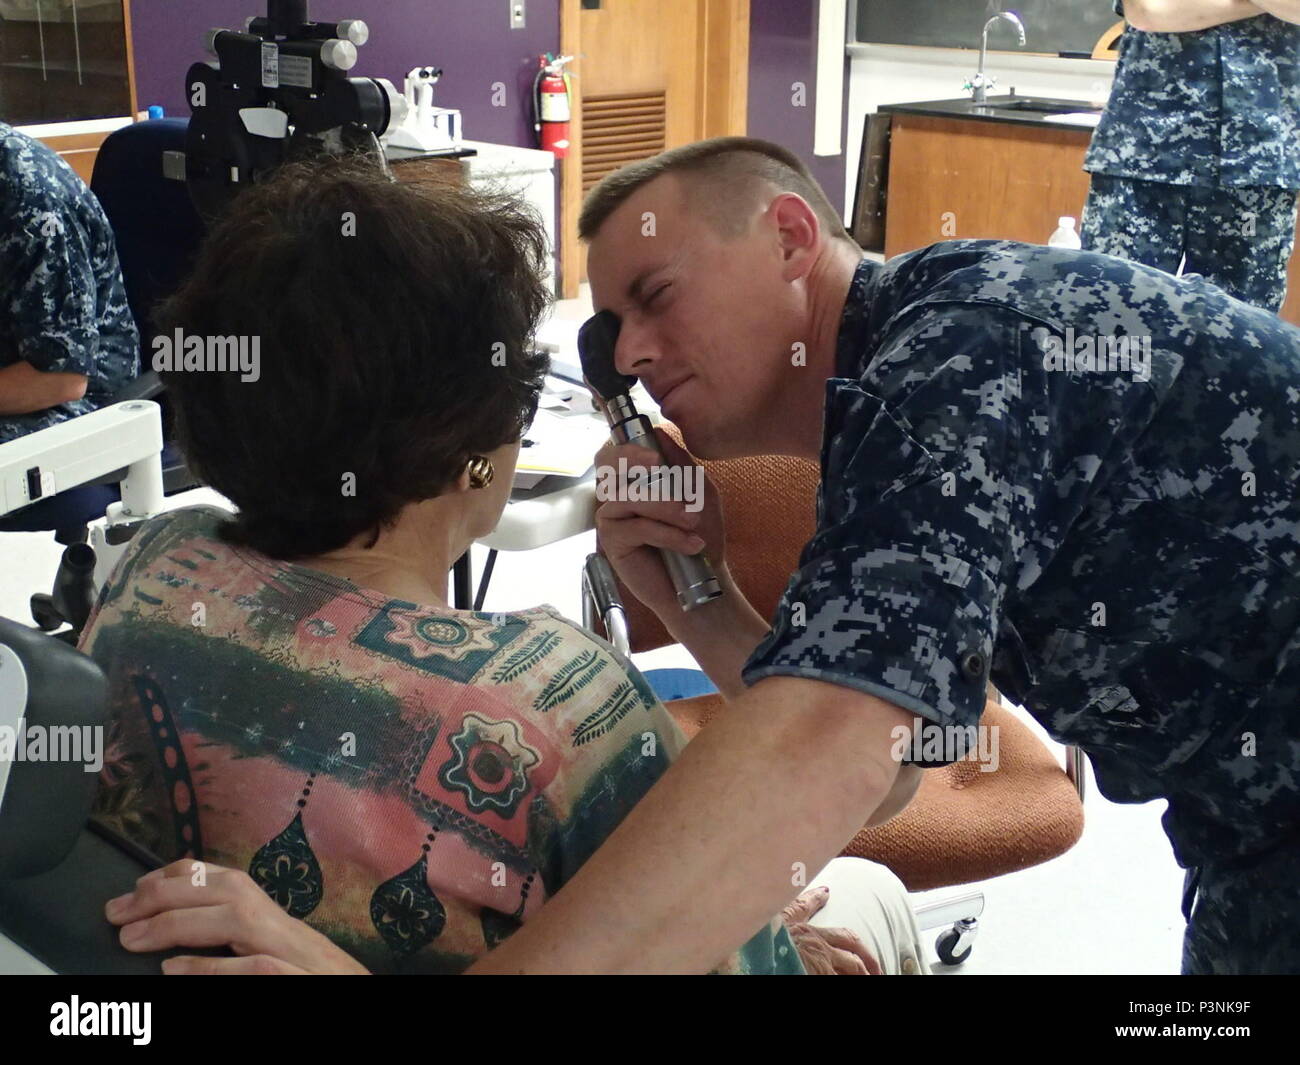 Lt. John Vingoe, an optometrist from the Naval Branch Health Clinic, Groton, Conn., conducts an eye exam on a patient during Greater Chenango Cares on July 15, 2016.  Greater Chenango Cares is one of the Innovative Readiness Training missions which provides real-world training in a joint civil-military environment while delivering world class medical care to the people of Chenango County, N.Y., from July 15-24. Stock Photo